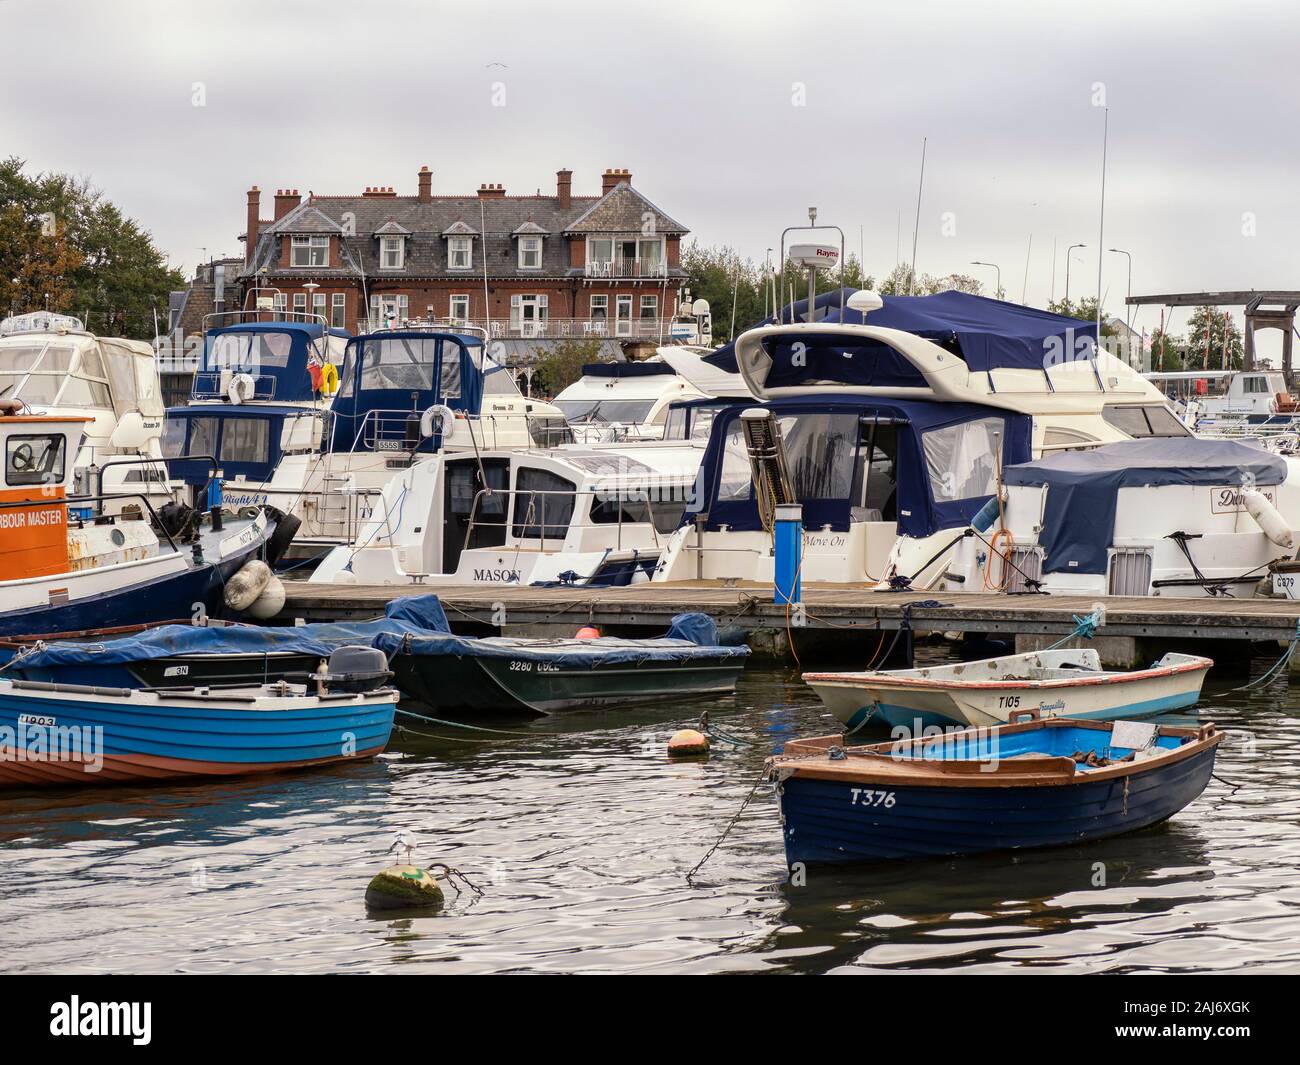 OULTON BROAD, SUFFOLK:  View of small boats at Oulton Broad Yacht Station with the Wherry Hotel in the background Stock Photo